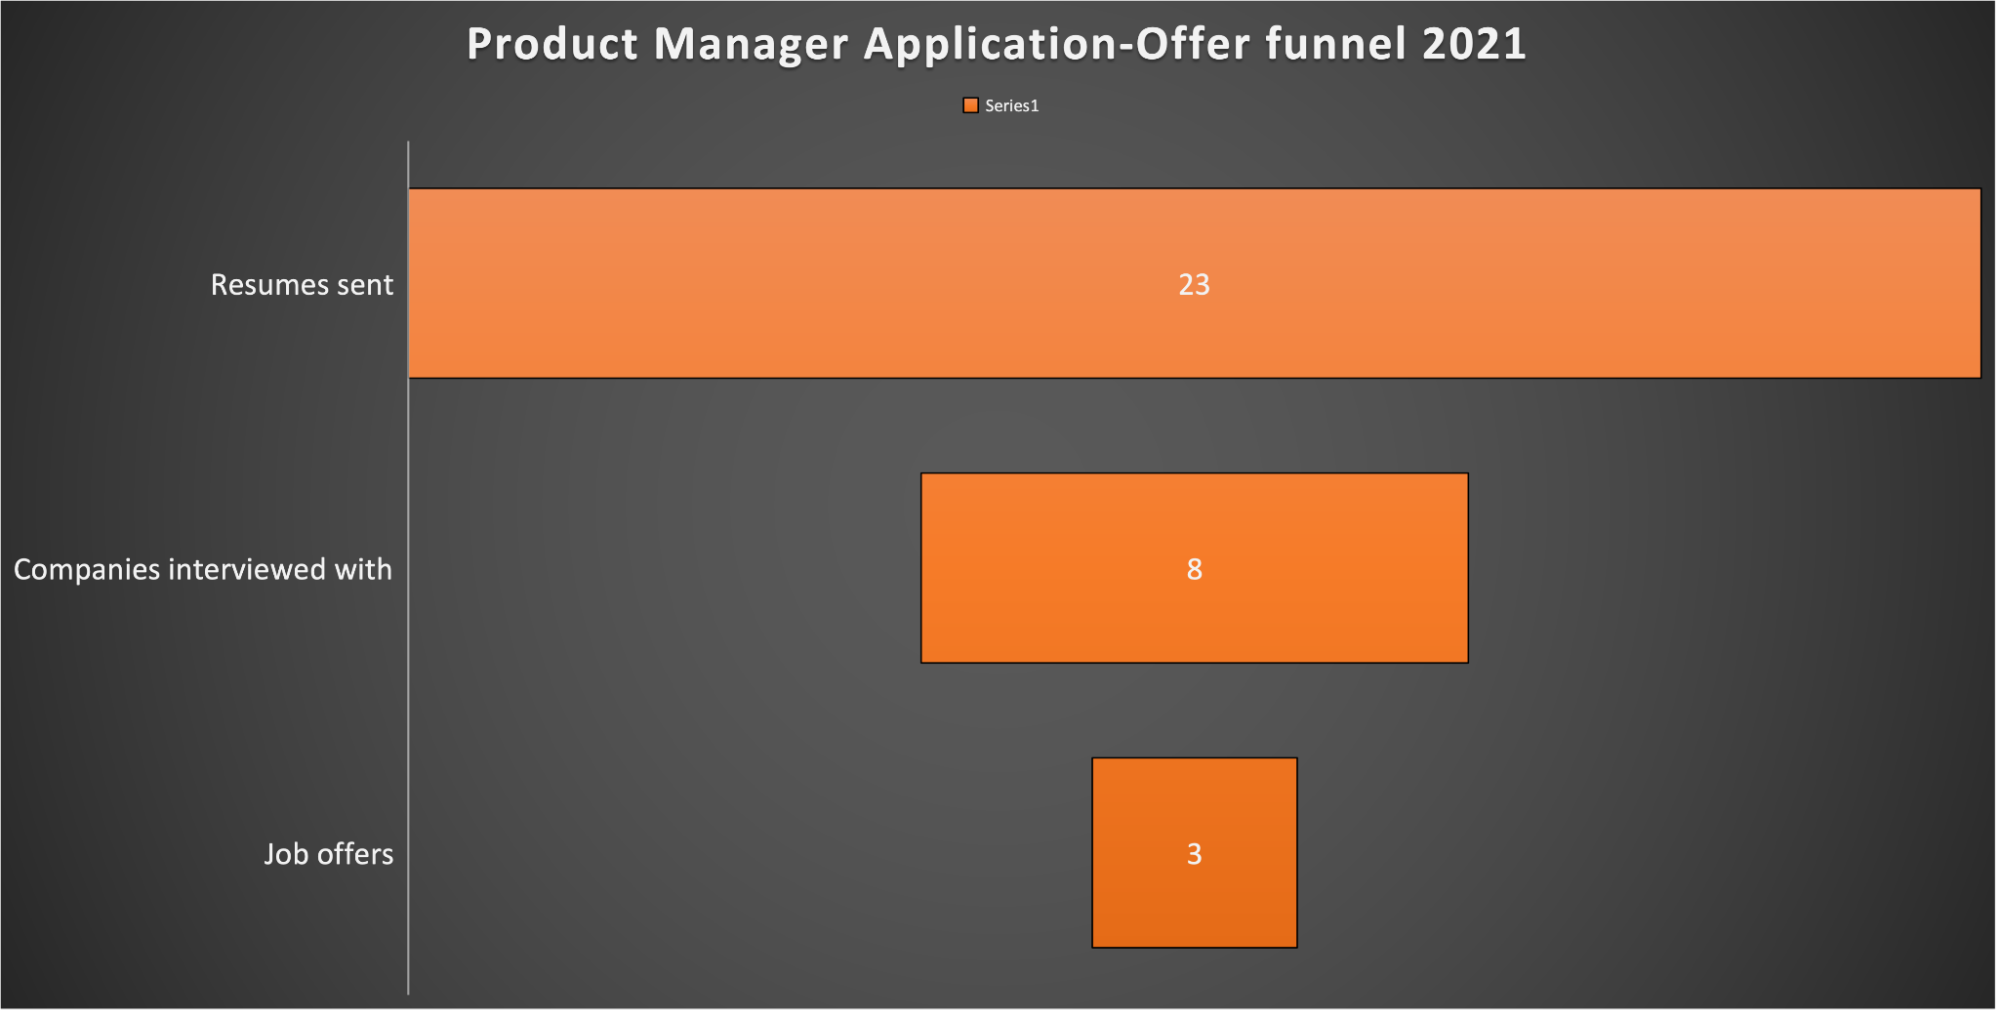 Product Manager's application to offer funnel